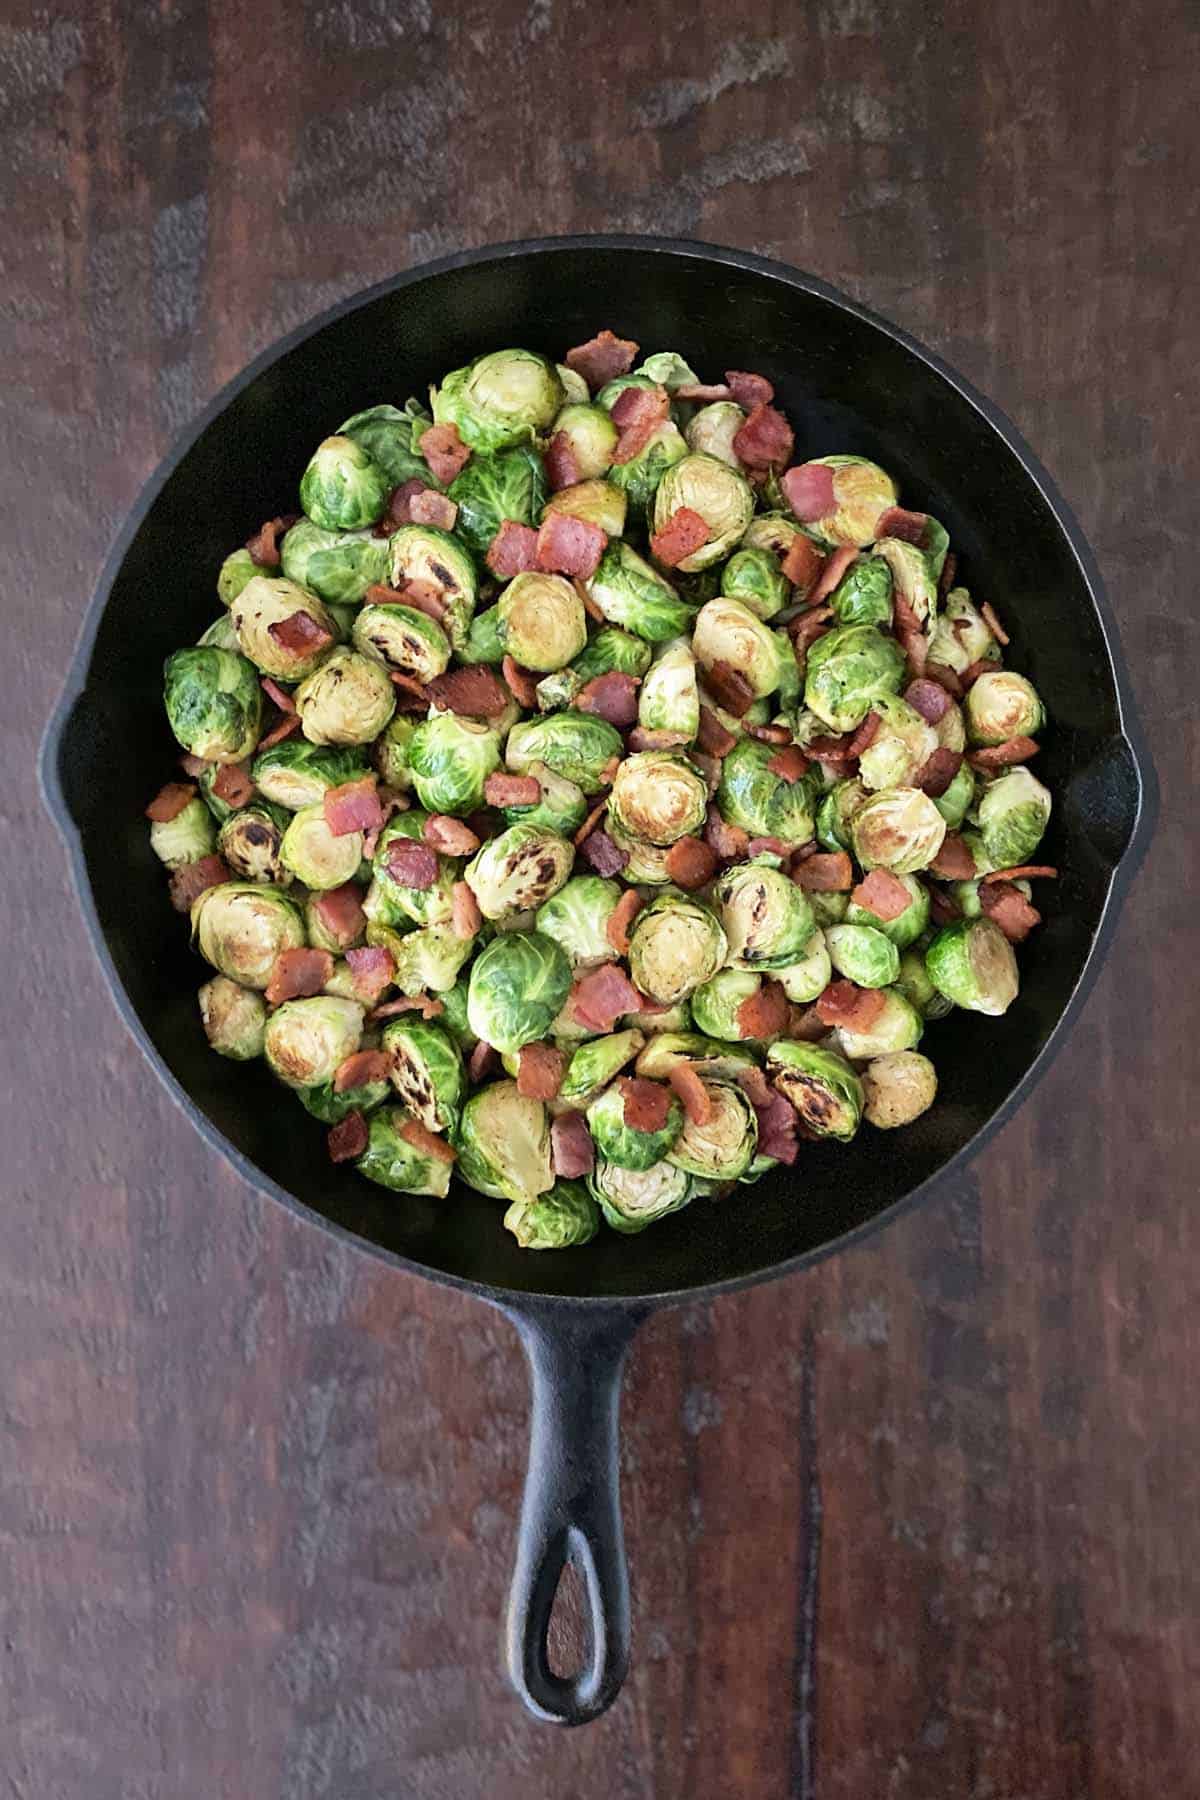 A cast iron skilled filled with cooked Brussel sprouts and bacon, set on a dark brown wooden table.